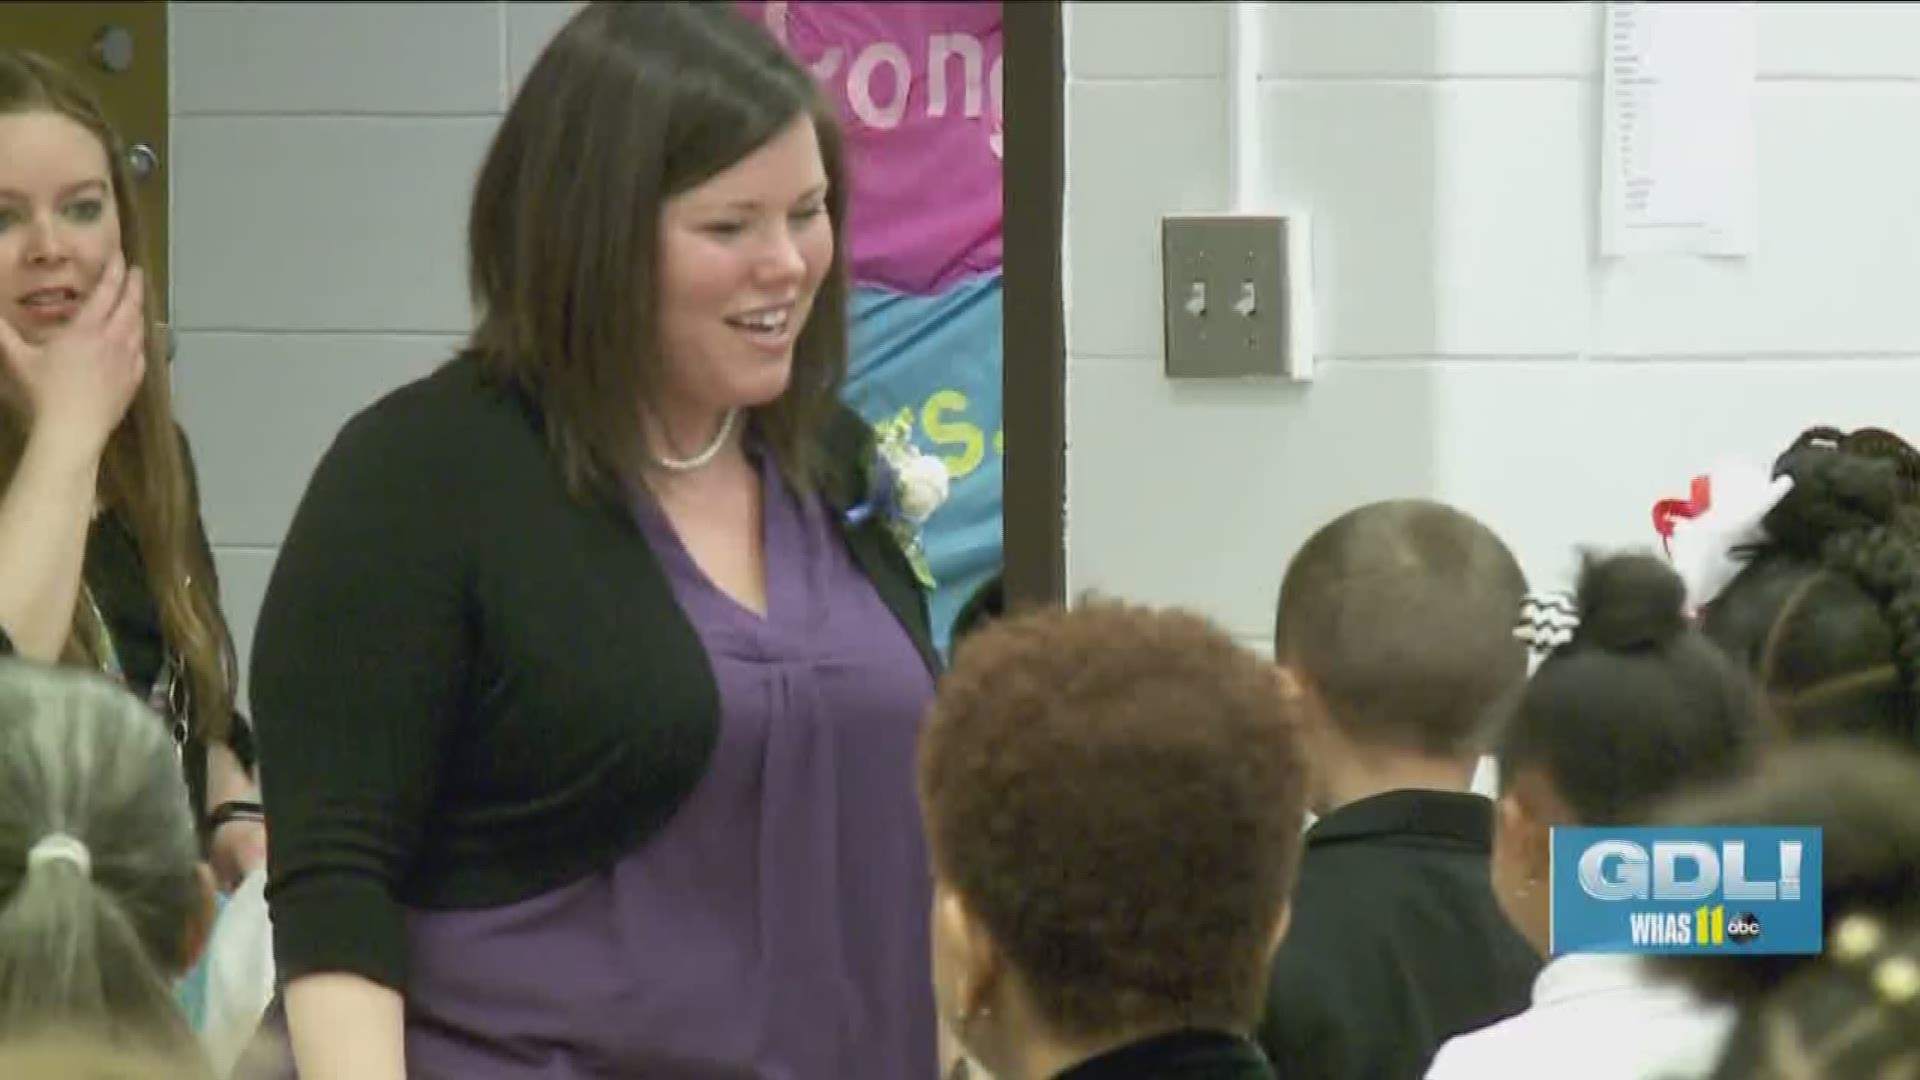 Meghann Clem Mattingly from Cane Run Elementary is the teacher being honored for her skills in the classroom.